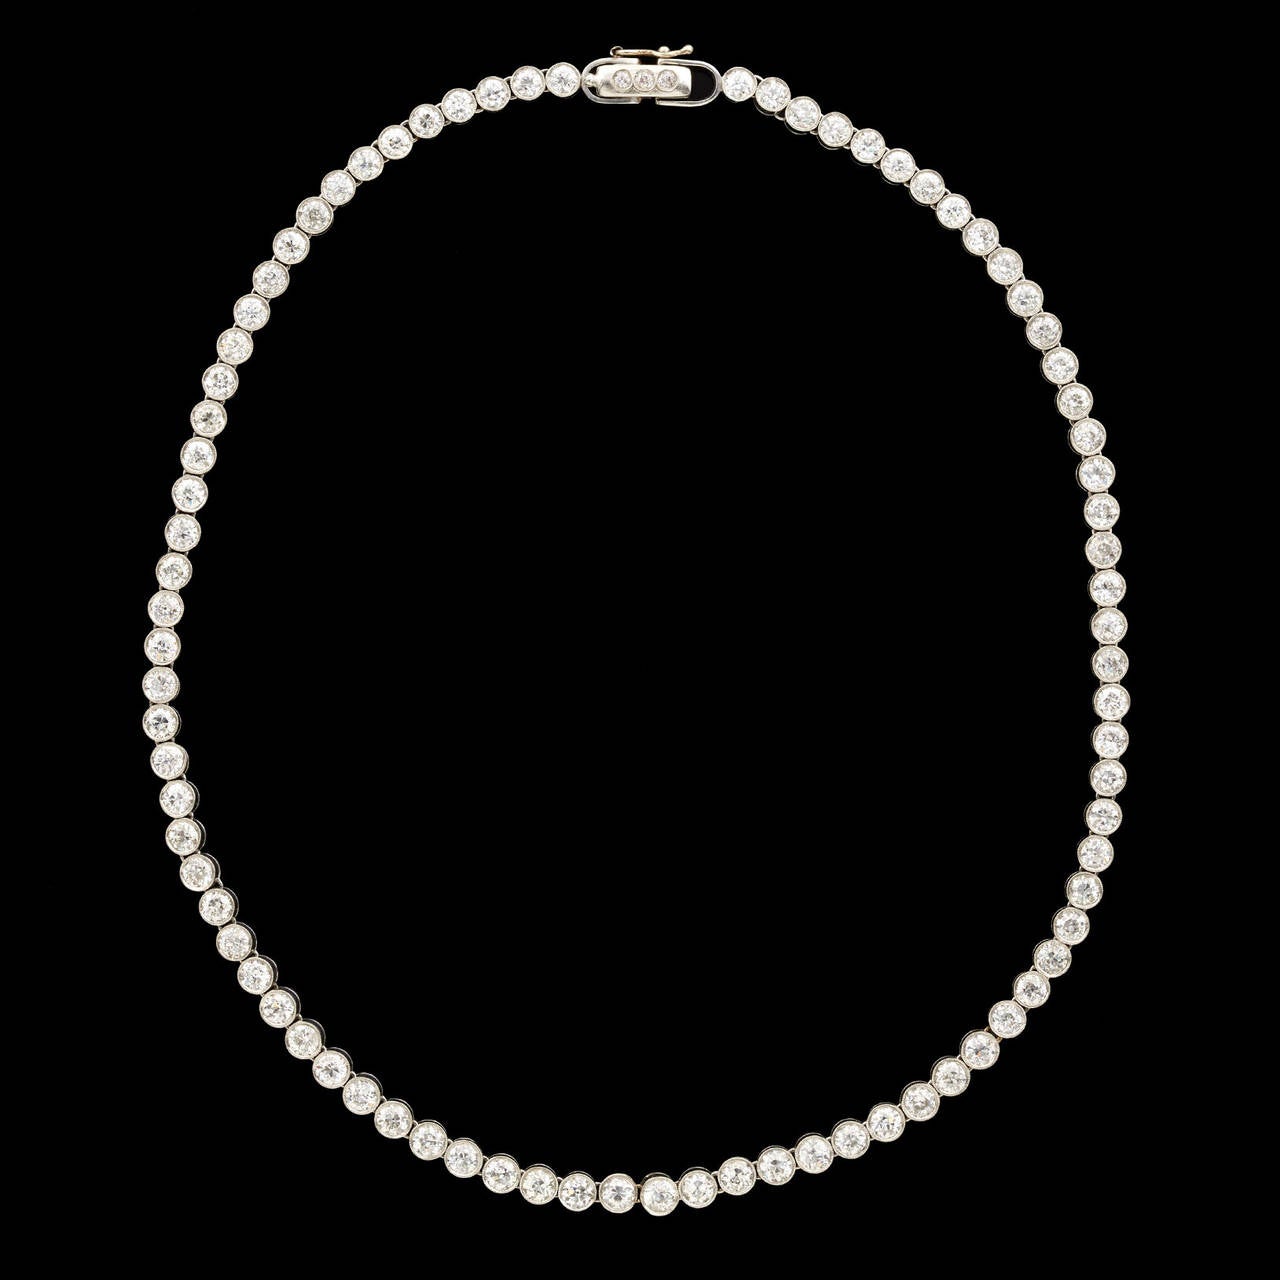 Vintage Line Necklace Features 85 Old Mine Cut Diamonds G Color and VS-SI Clarity, Weighing Approximately 20.00-ctw. The stones are bezel set in platinum with milgrain detail. The necklace is 16 inches long and 4.5mm wide and weighs 41.7 grams.